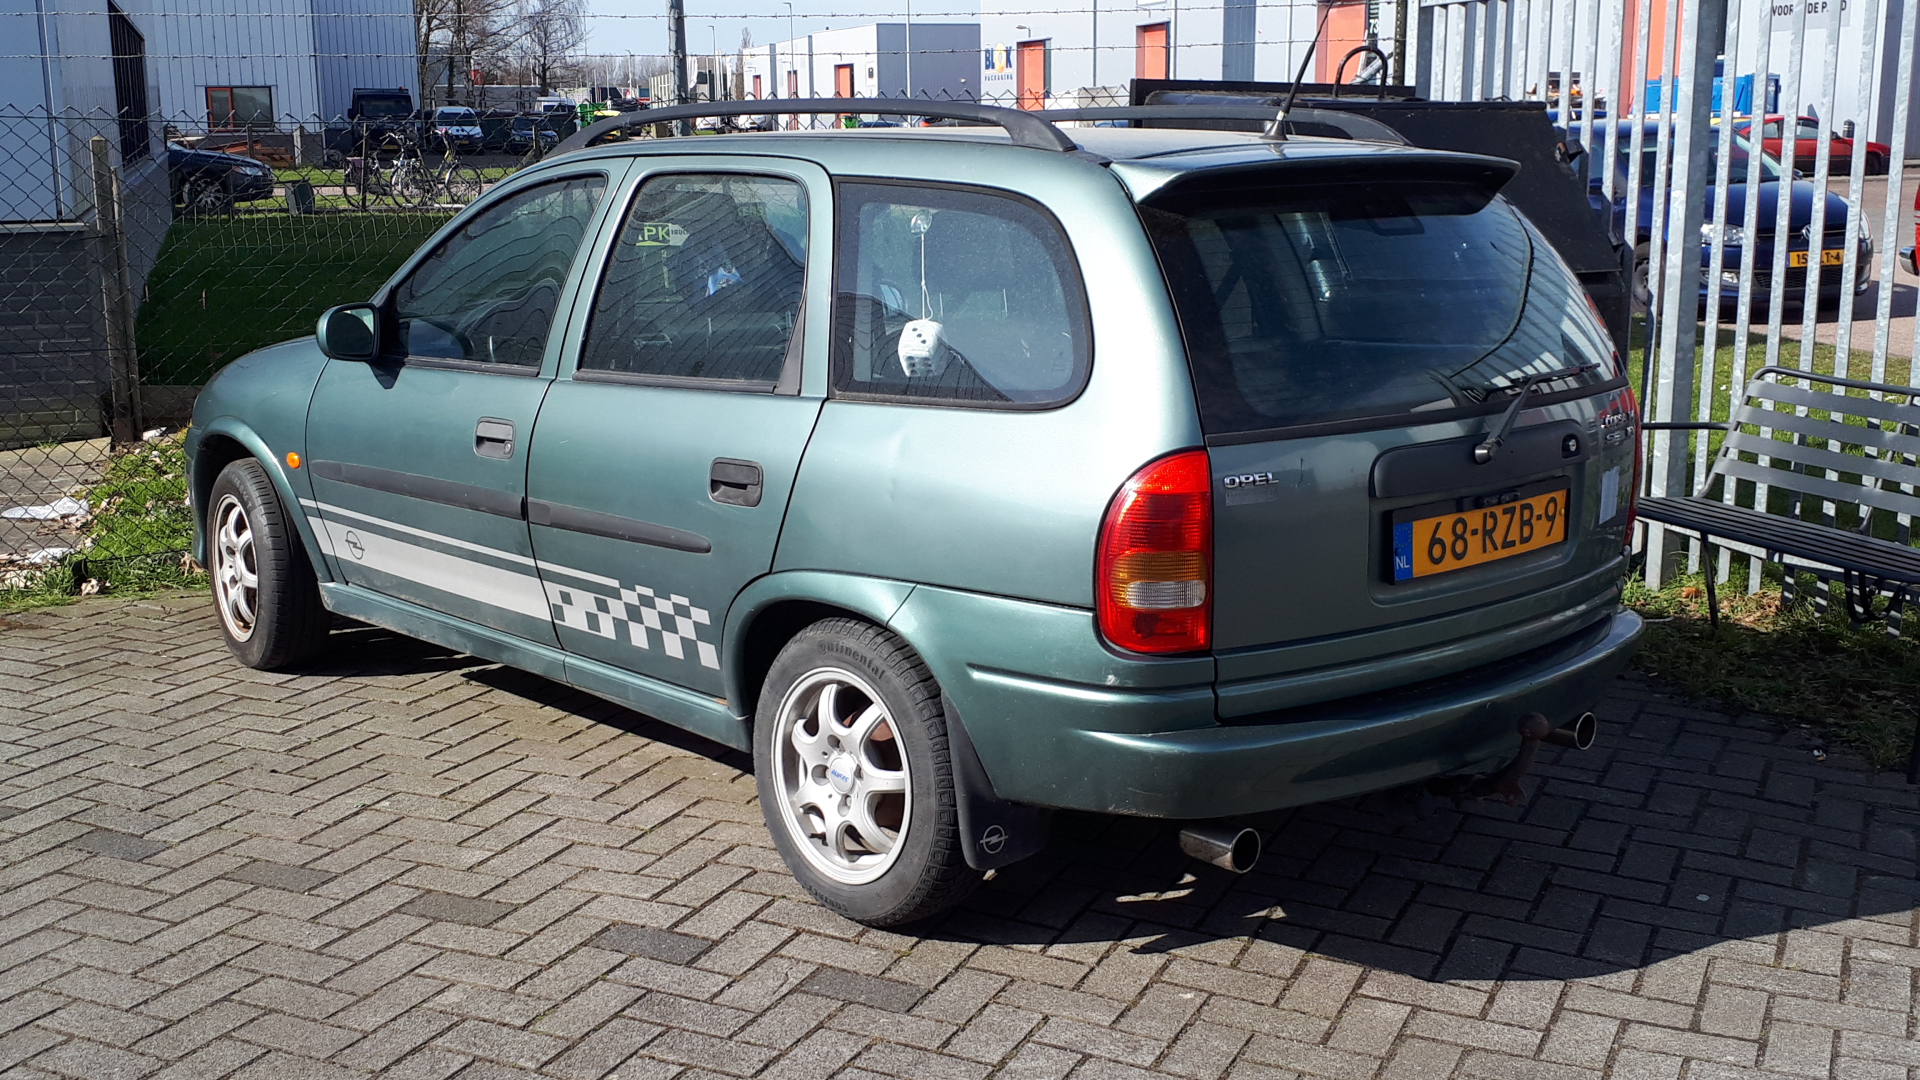 Enzovoorts Voorwaarden Subsidie Spotted: an Opel Corsa ... as an estate car! - All cars news